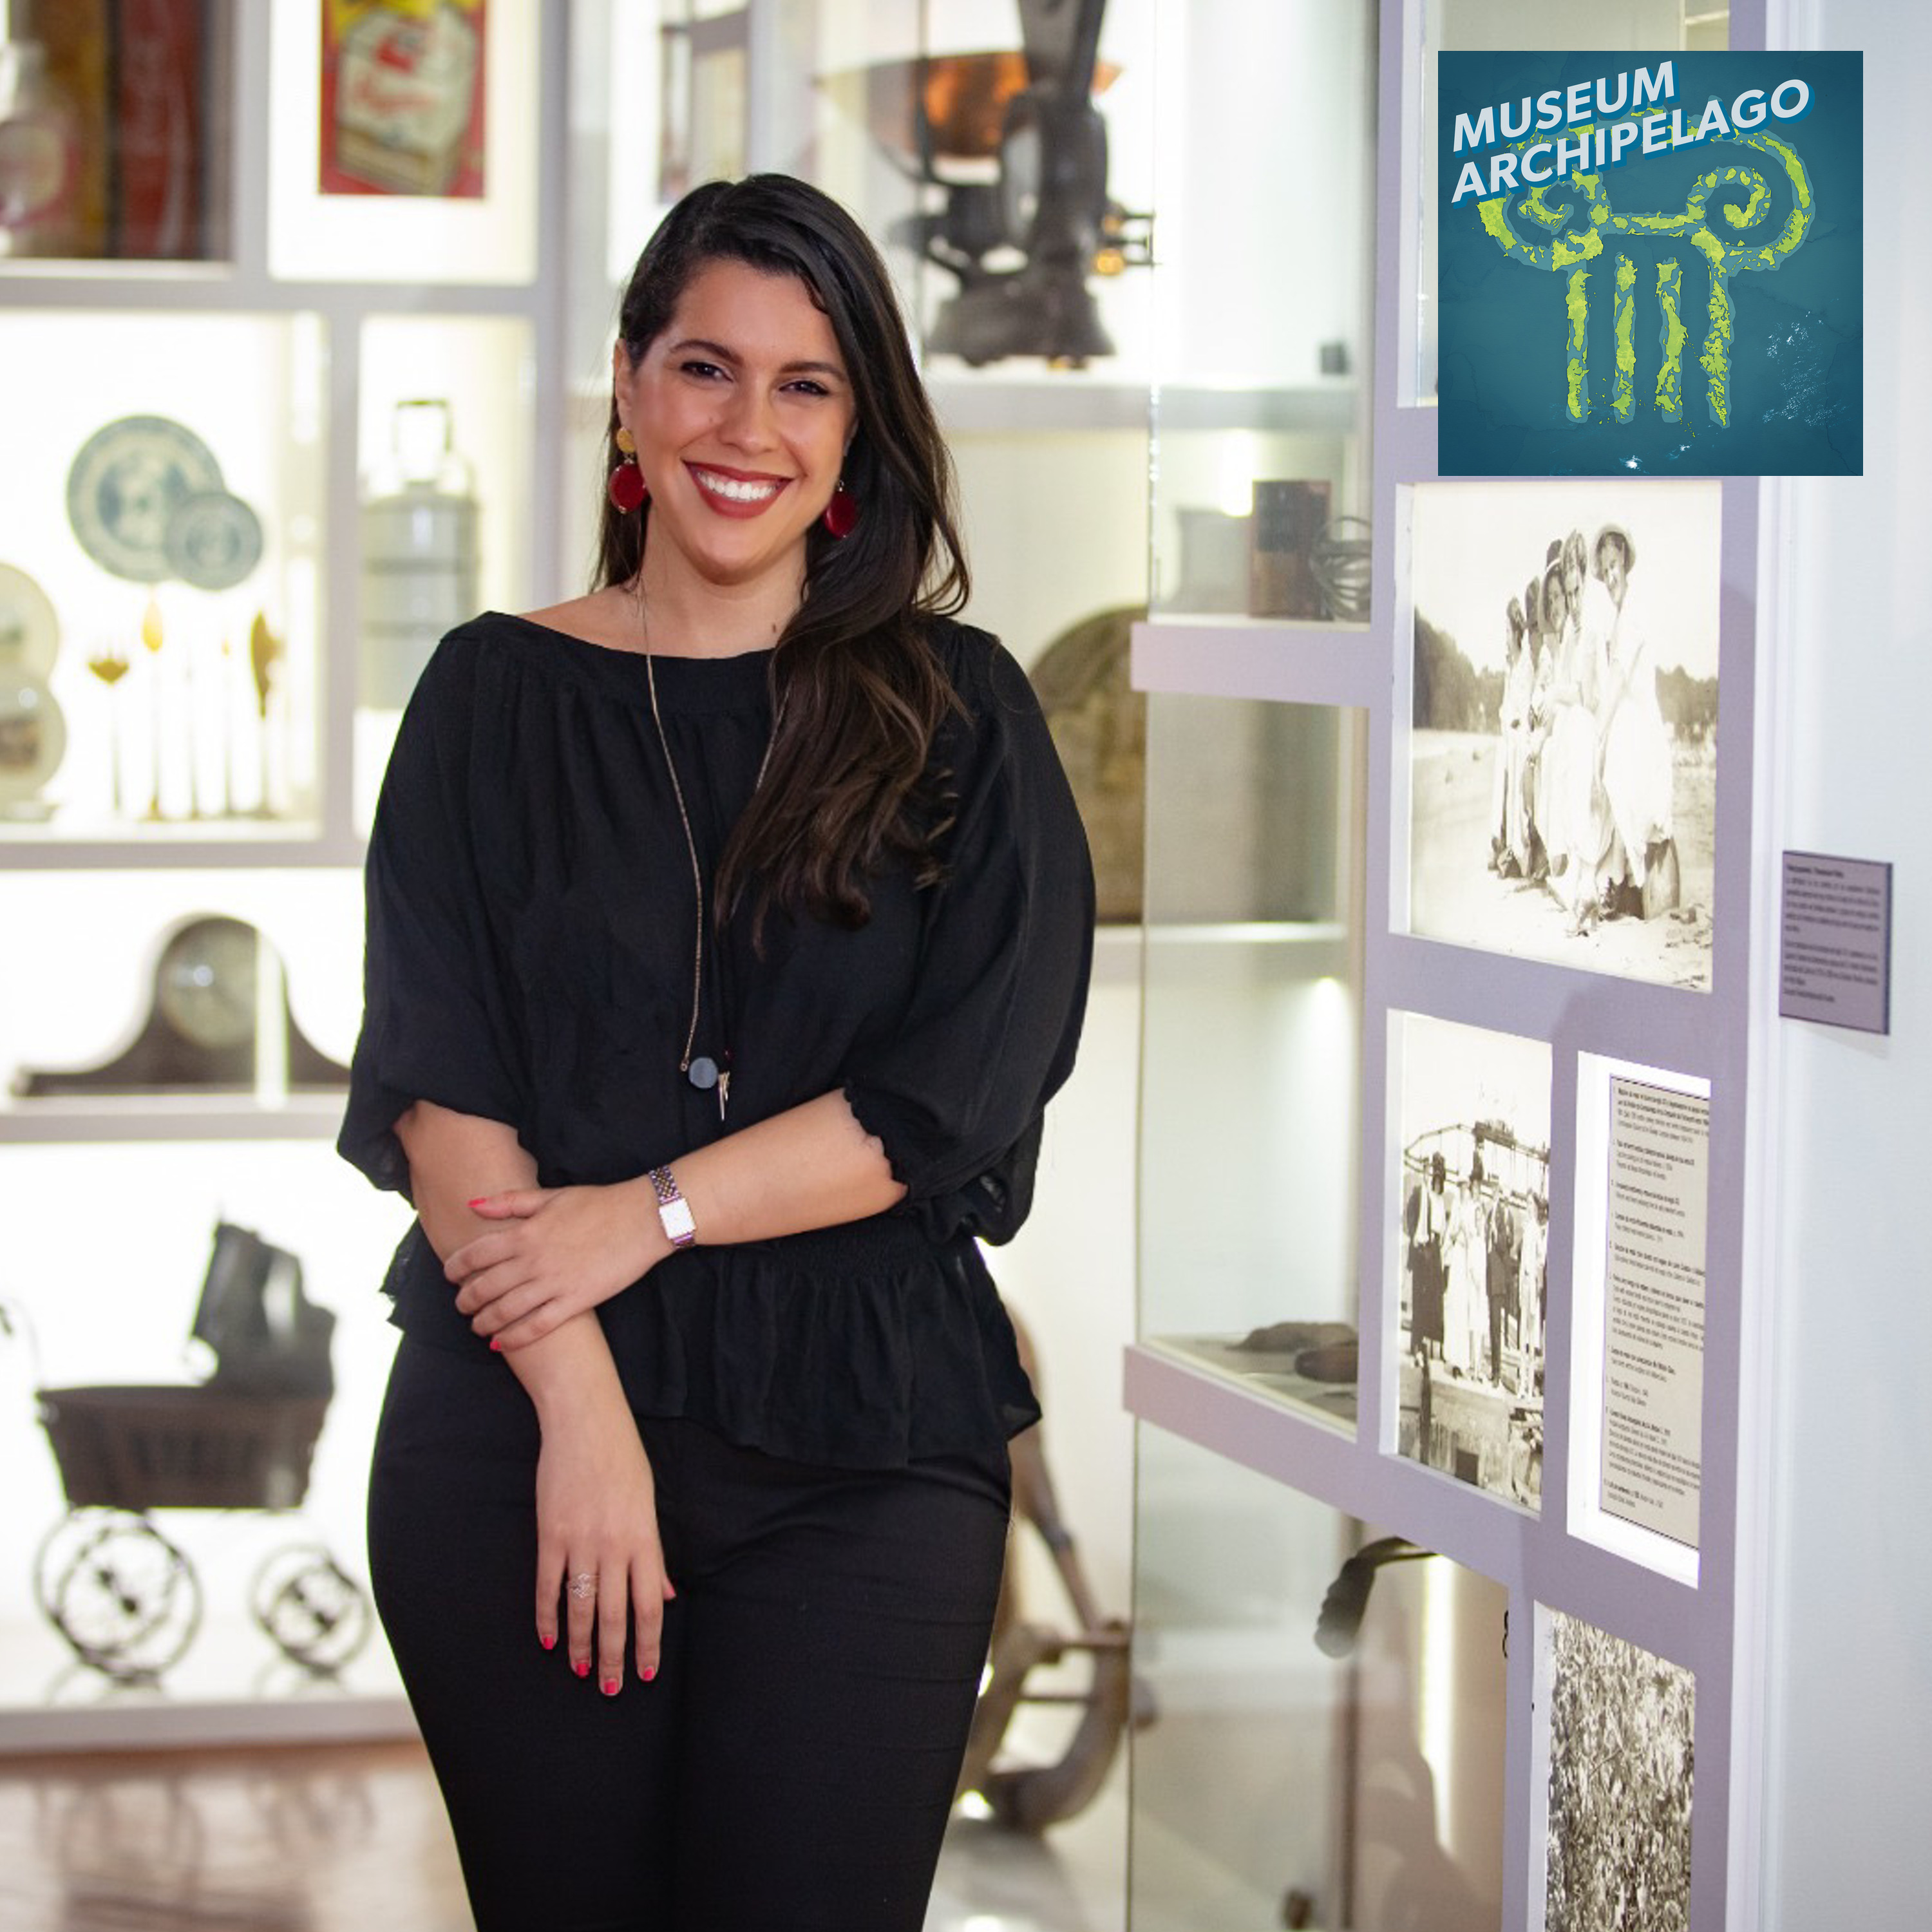 98. At the Panama Canal Museum, Ana Elizabeth González Creates a Global Connection Point